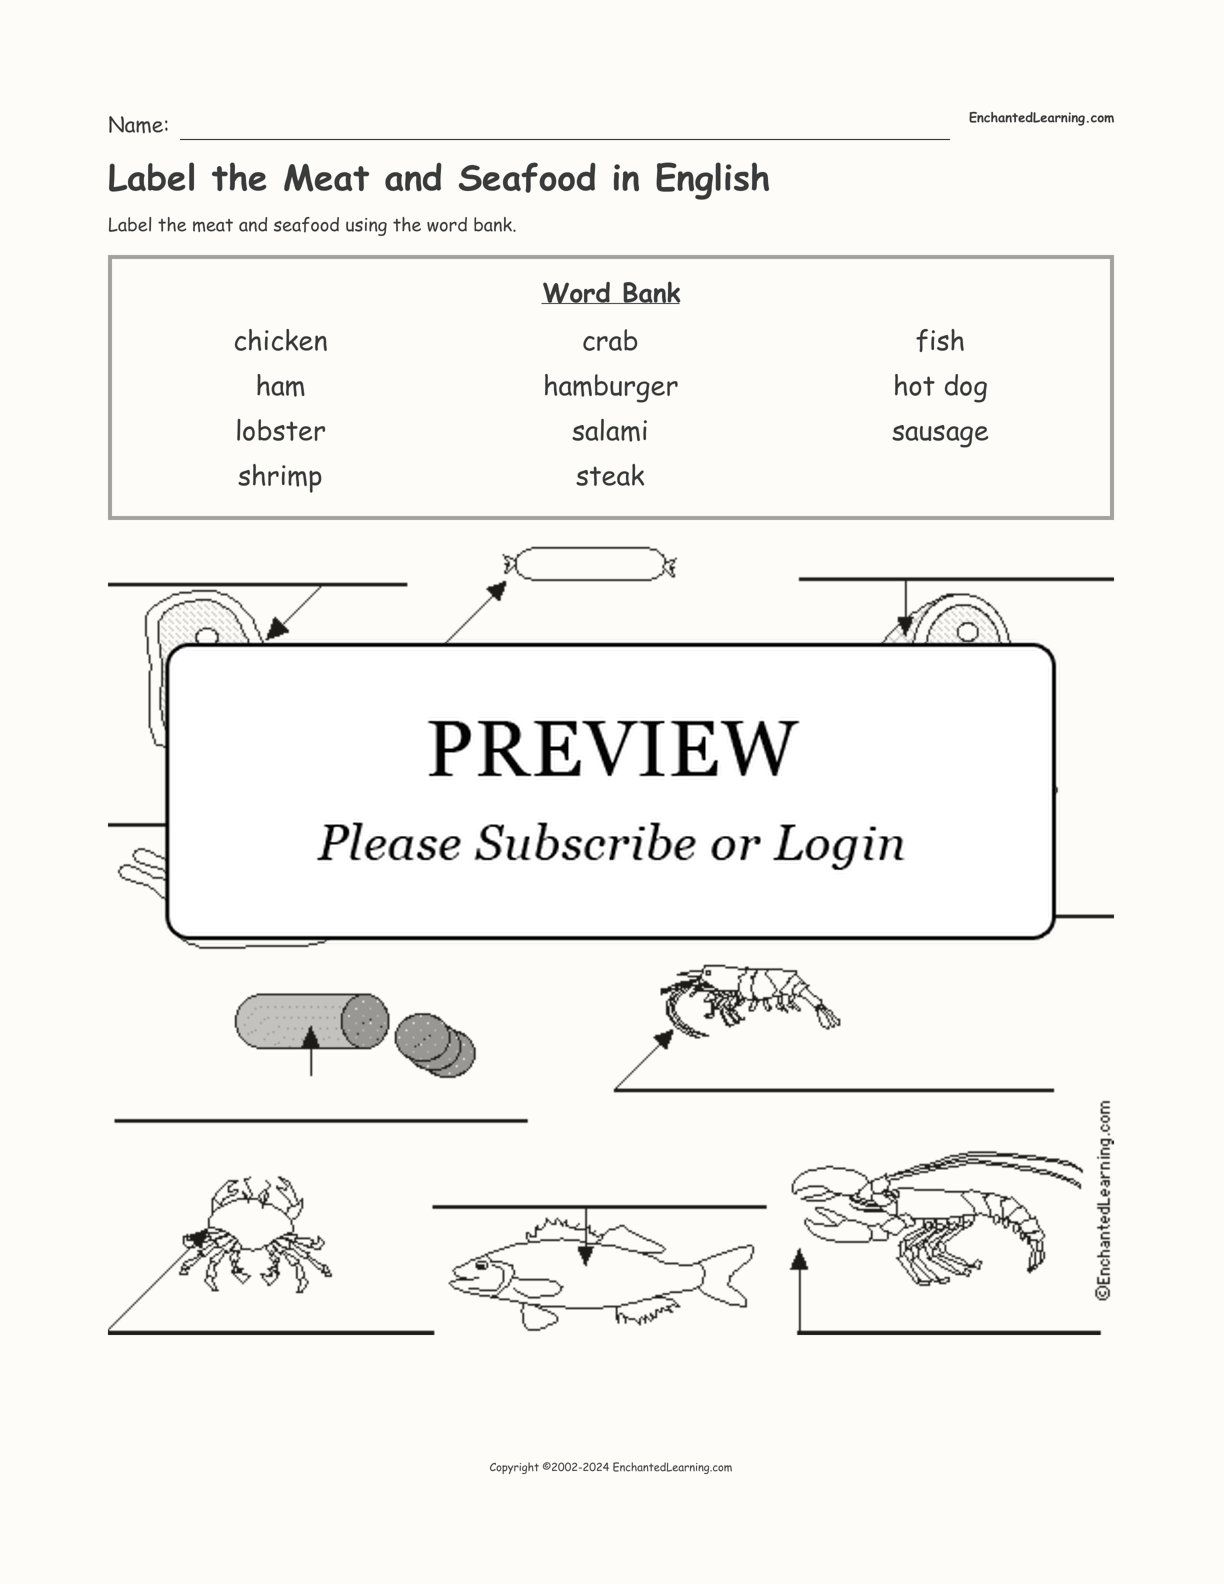 Label the Meat and Seafood in English interactive worksheet page 1